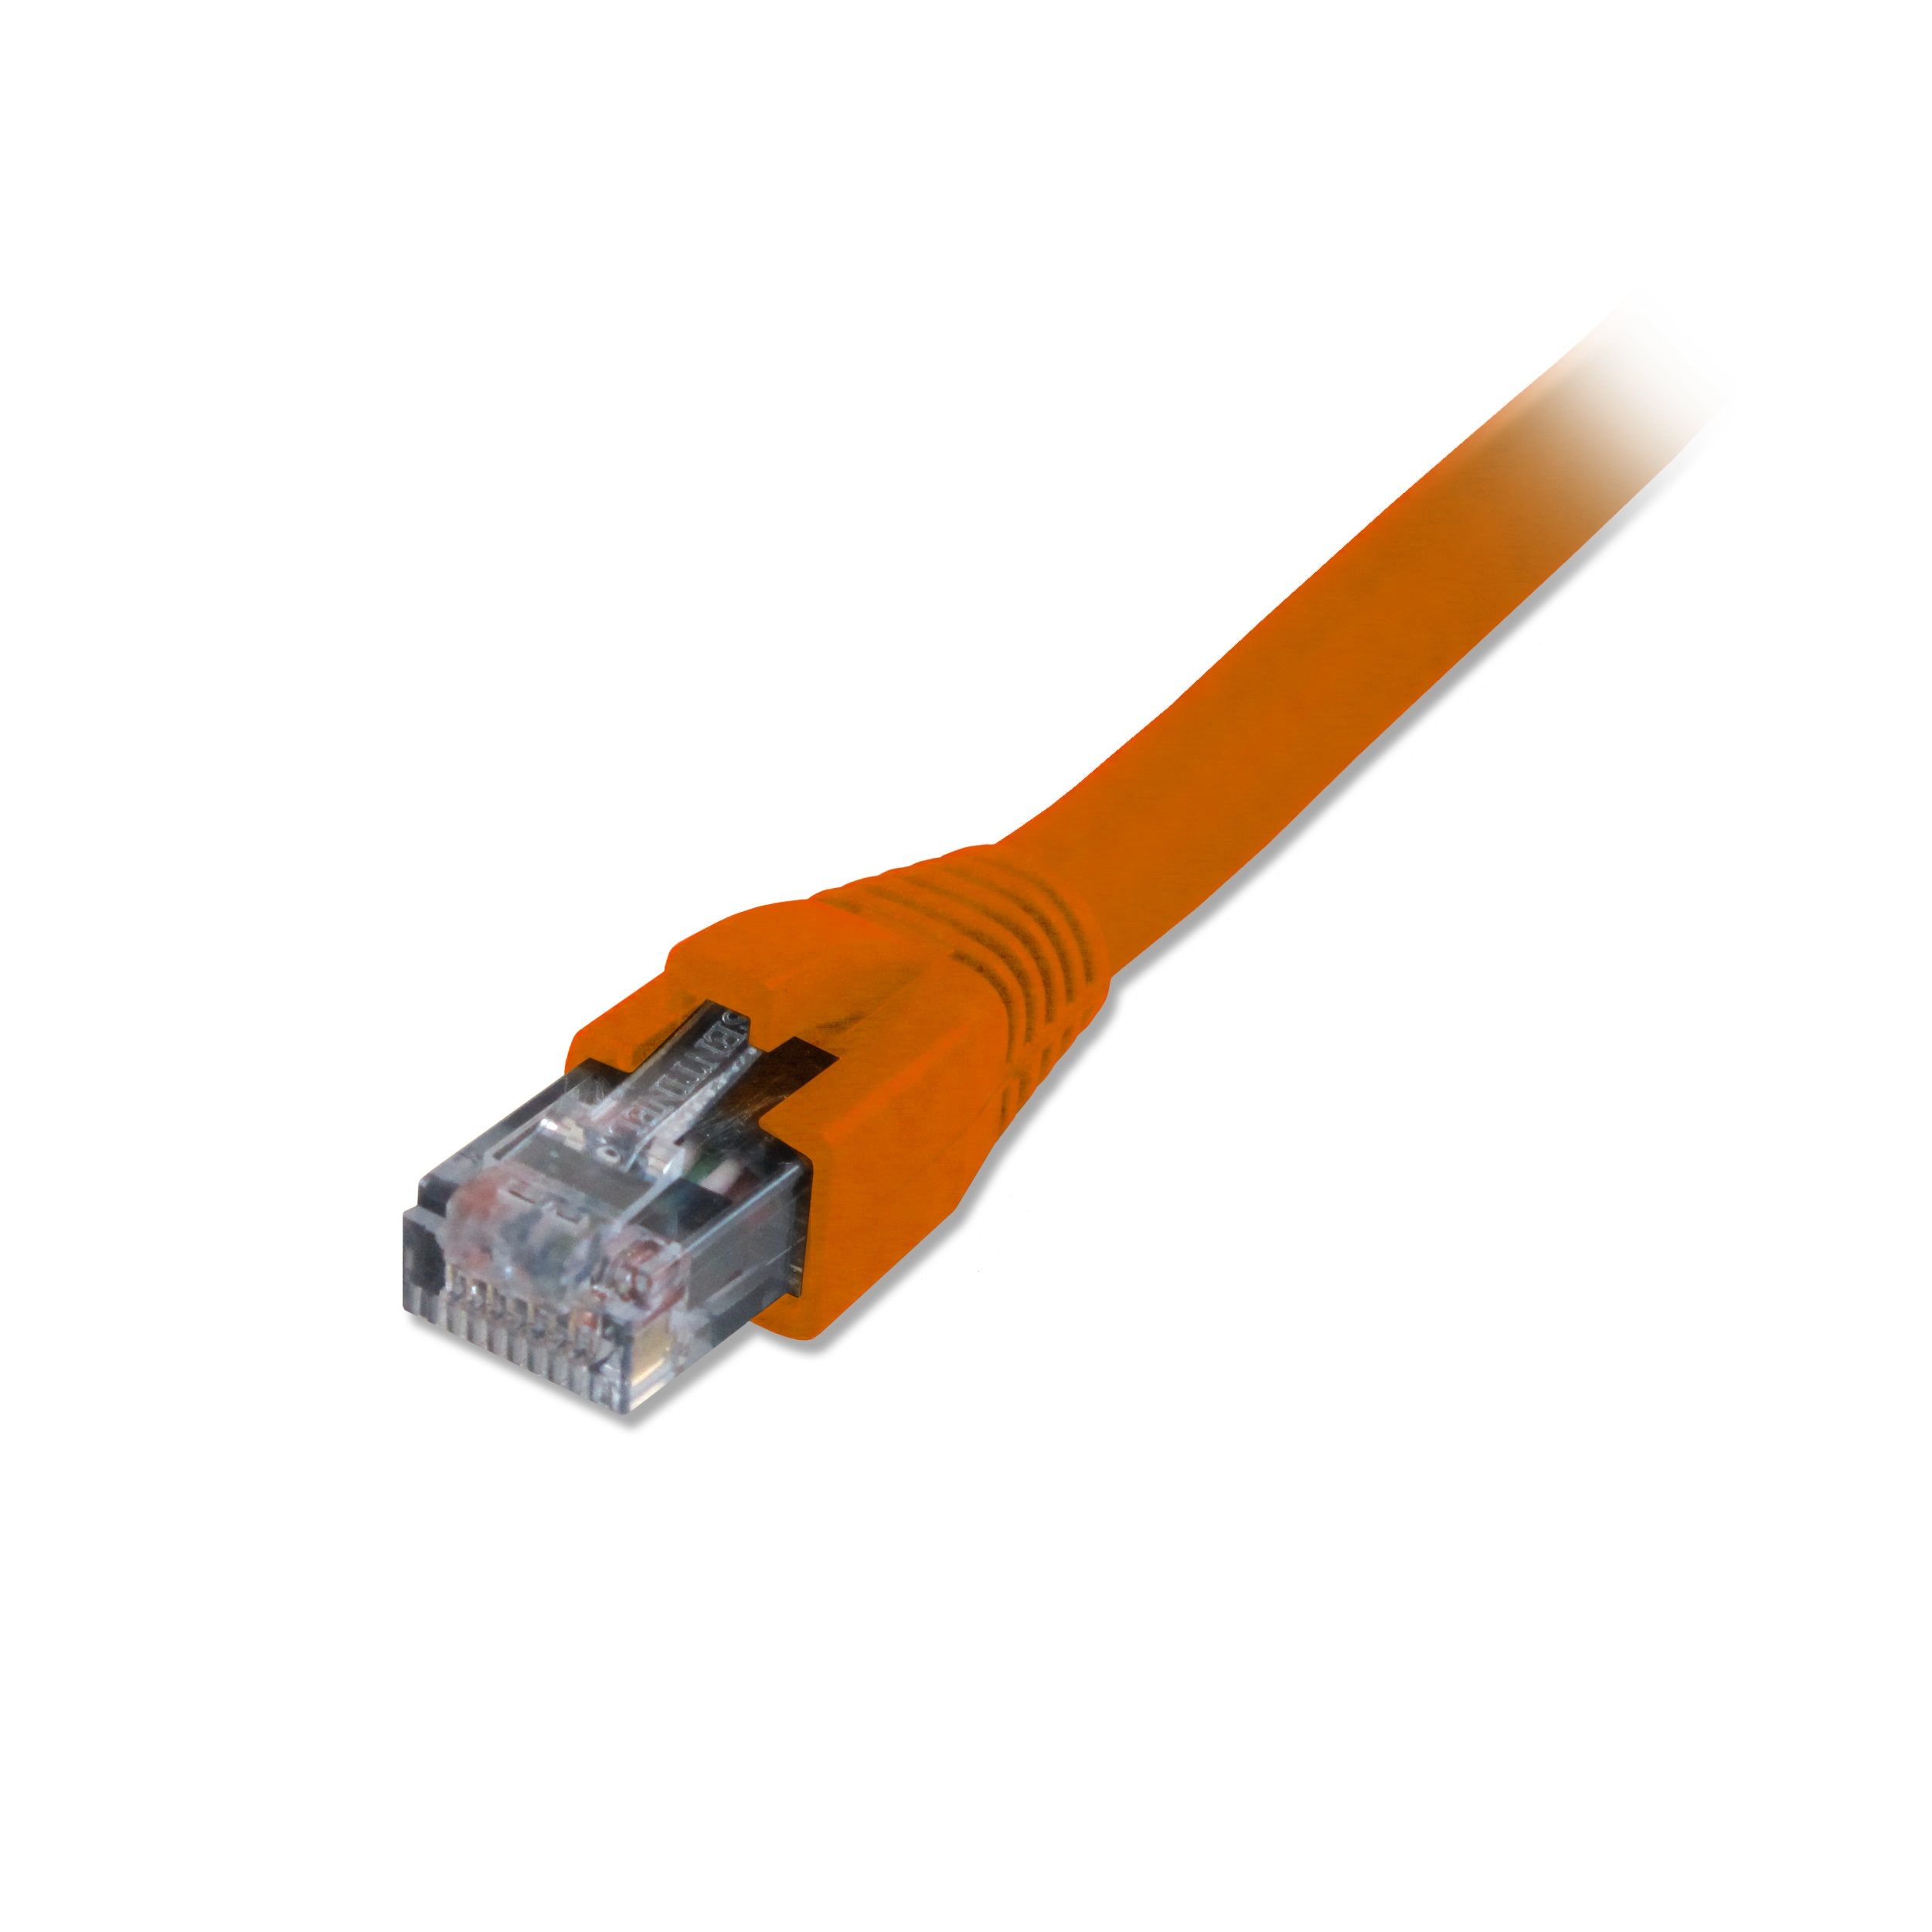 Comprehensive CAT5-350-1ORG Cat5e 350 Mhz Snagless Patch Cable 1ft Orange